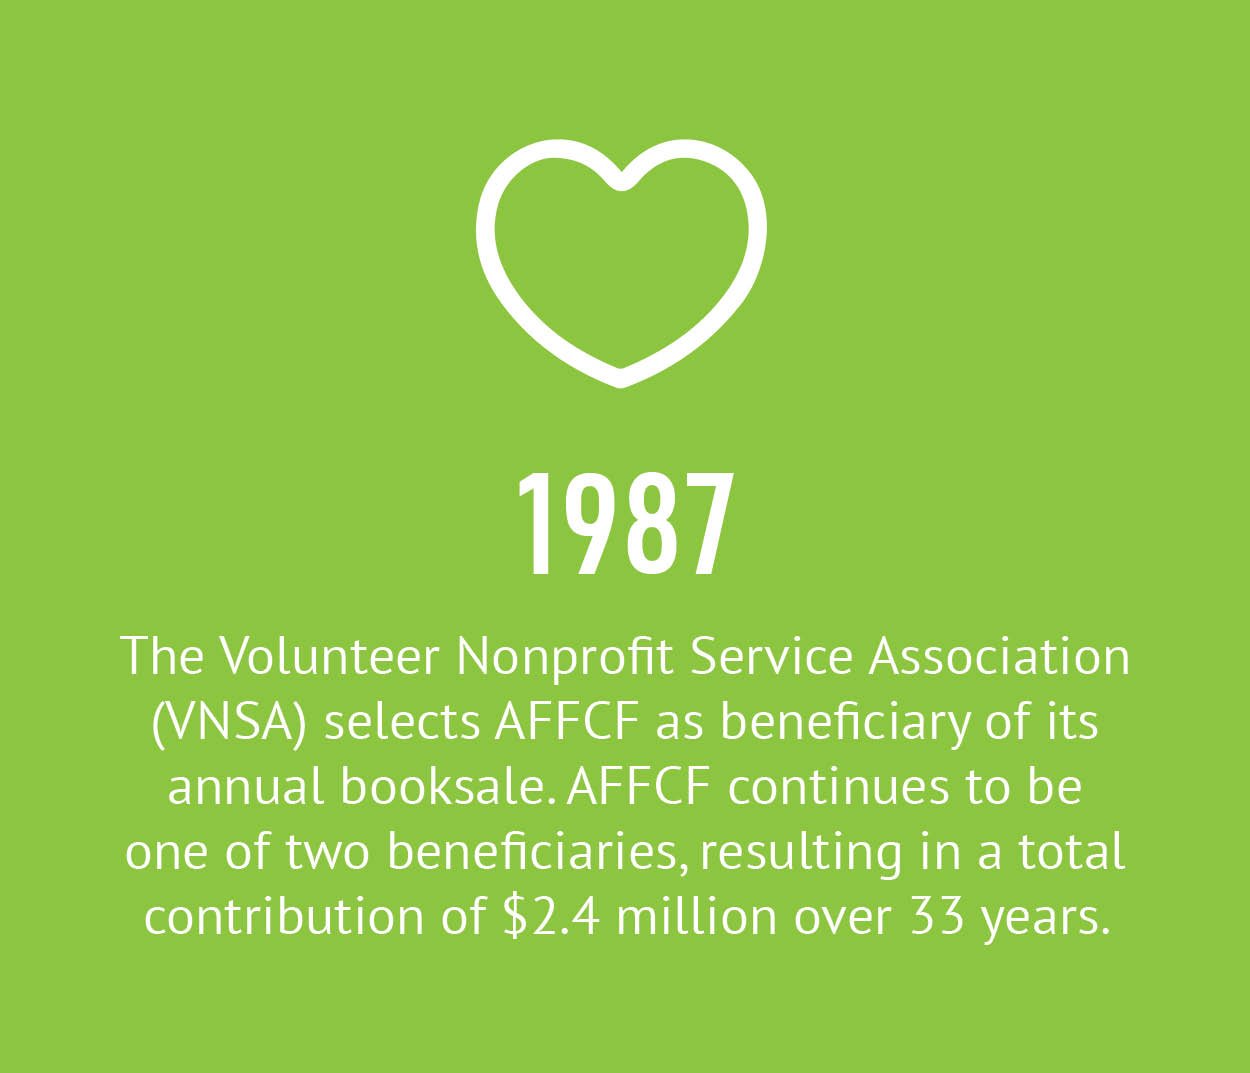 1987 - The Volunteer Nonprofit Service Association (VNSA) selects AFFCF as beneficiary of its annual booksale. AFFCF continues to be one of two beneficiaries, resulting in a total contribution of $2.4 million over 33 years.